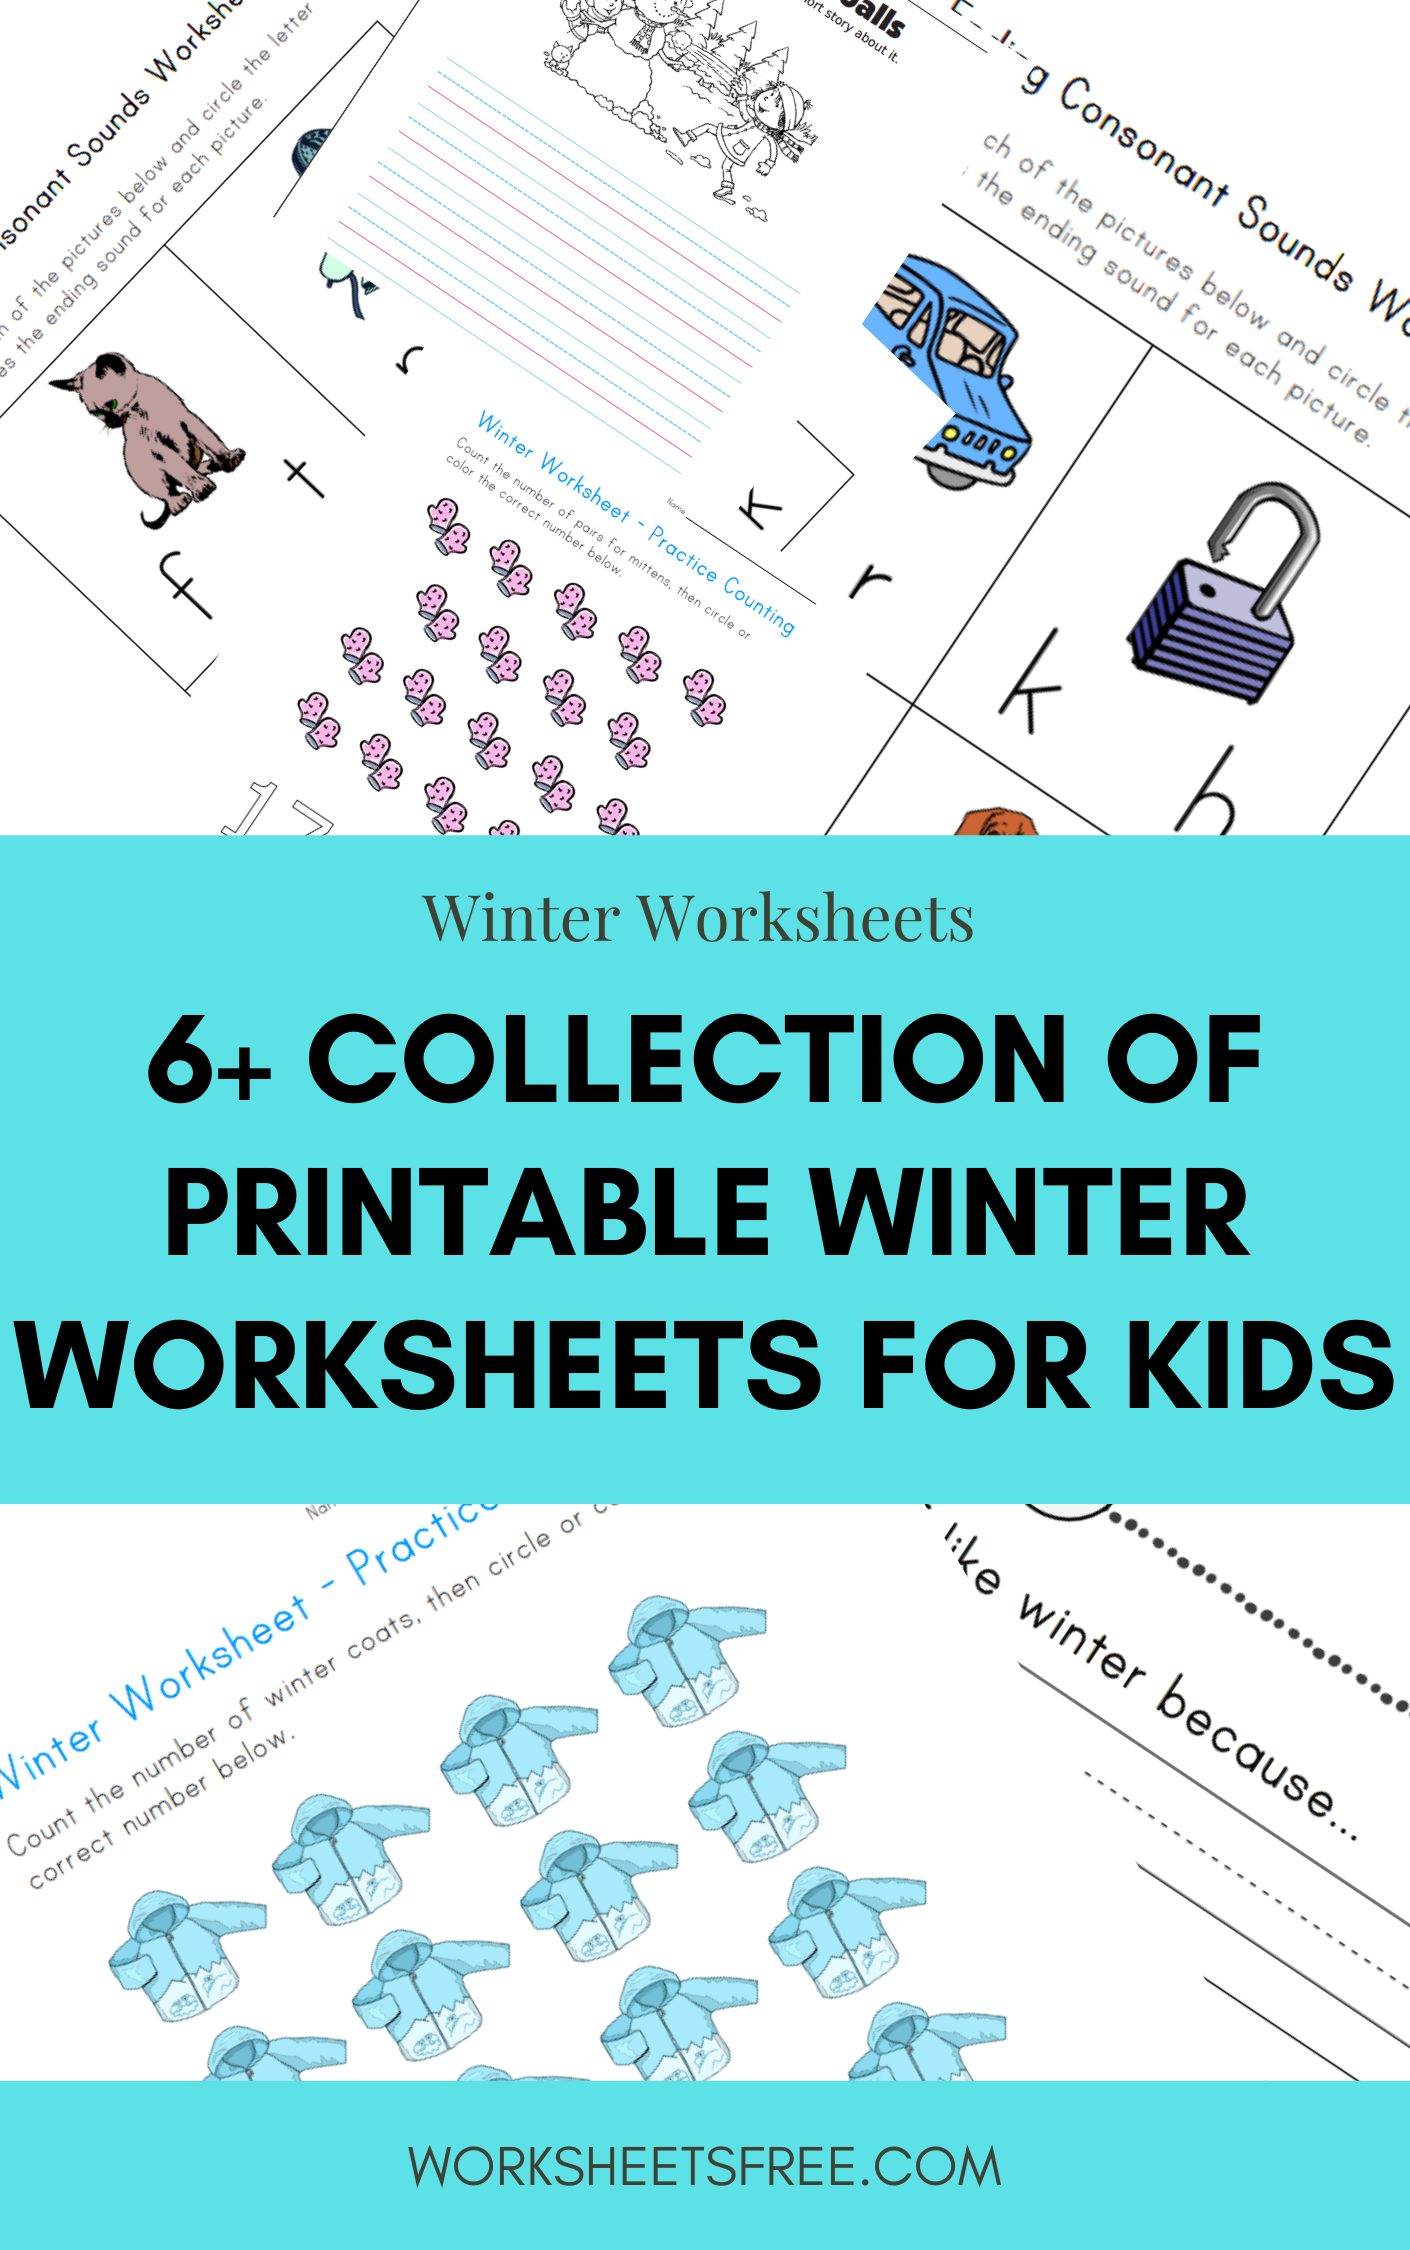 Collection Of Printable Winter Worksheets For Kids Worksheets Free